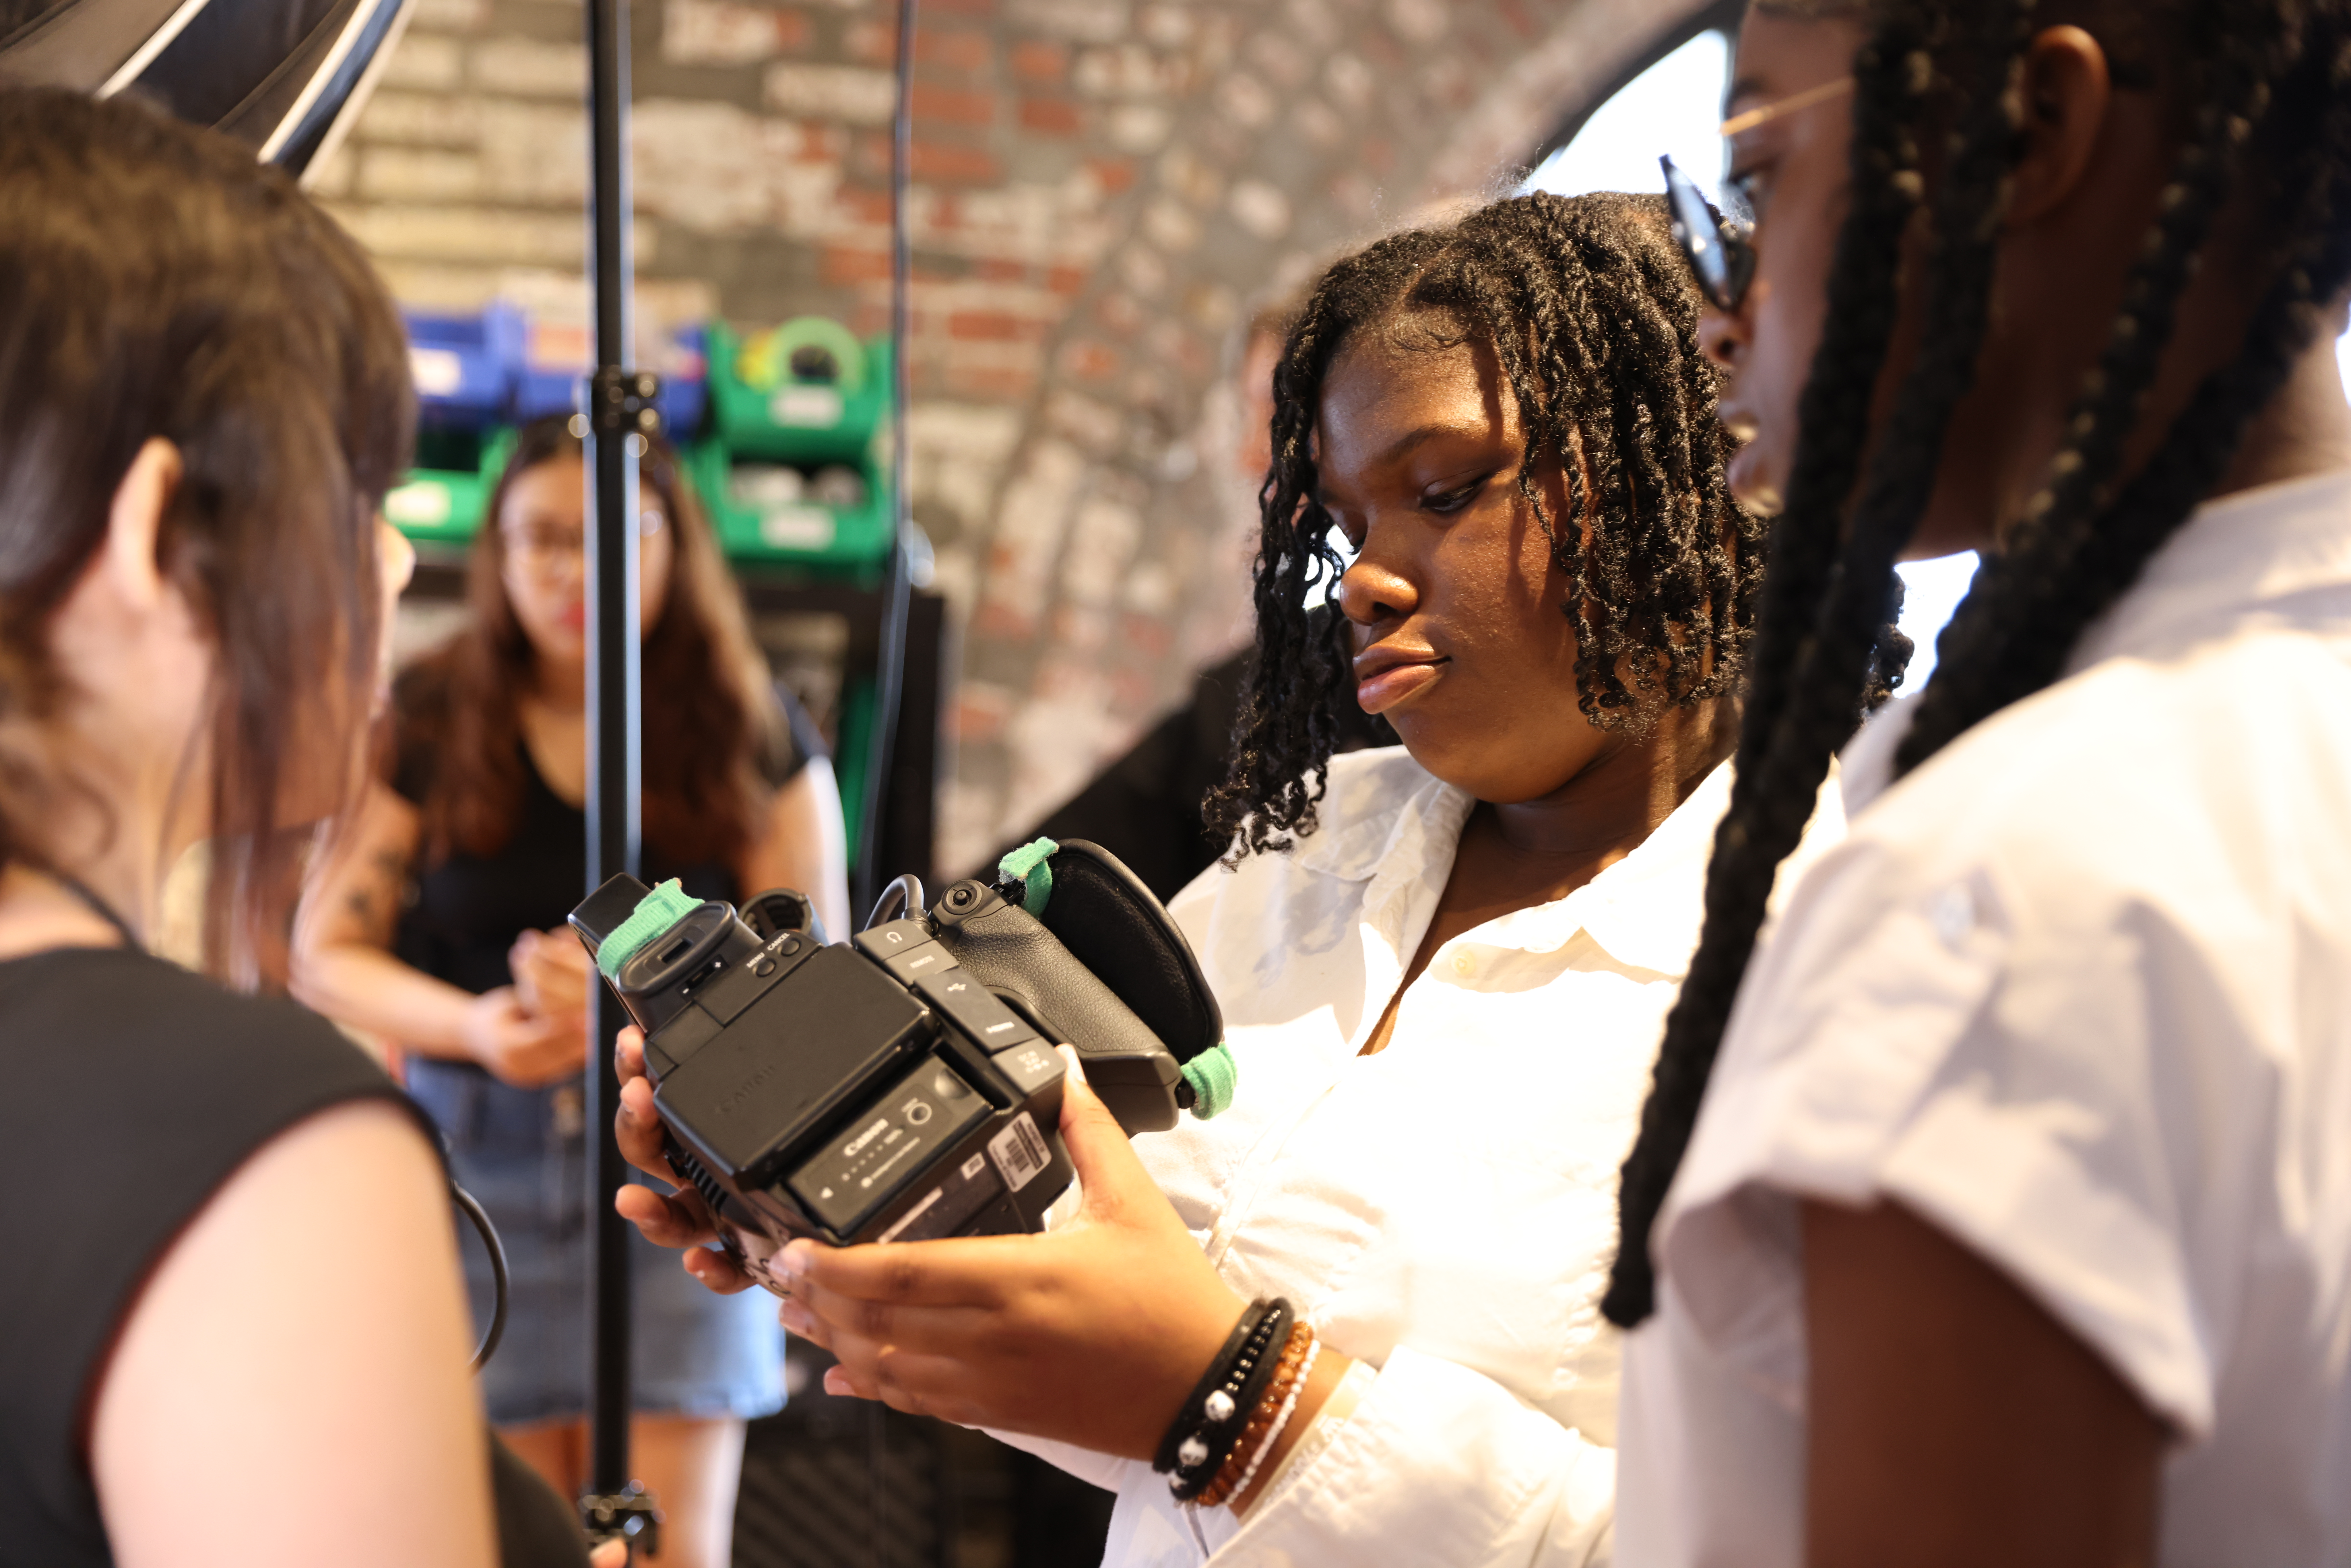 A young student operating a camera. In the foreground, two other students look on. In the background is another student and a shelf of supplies.